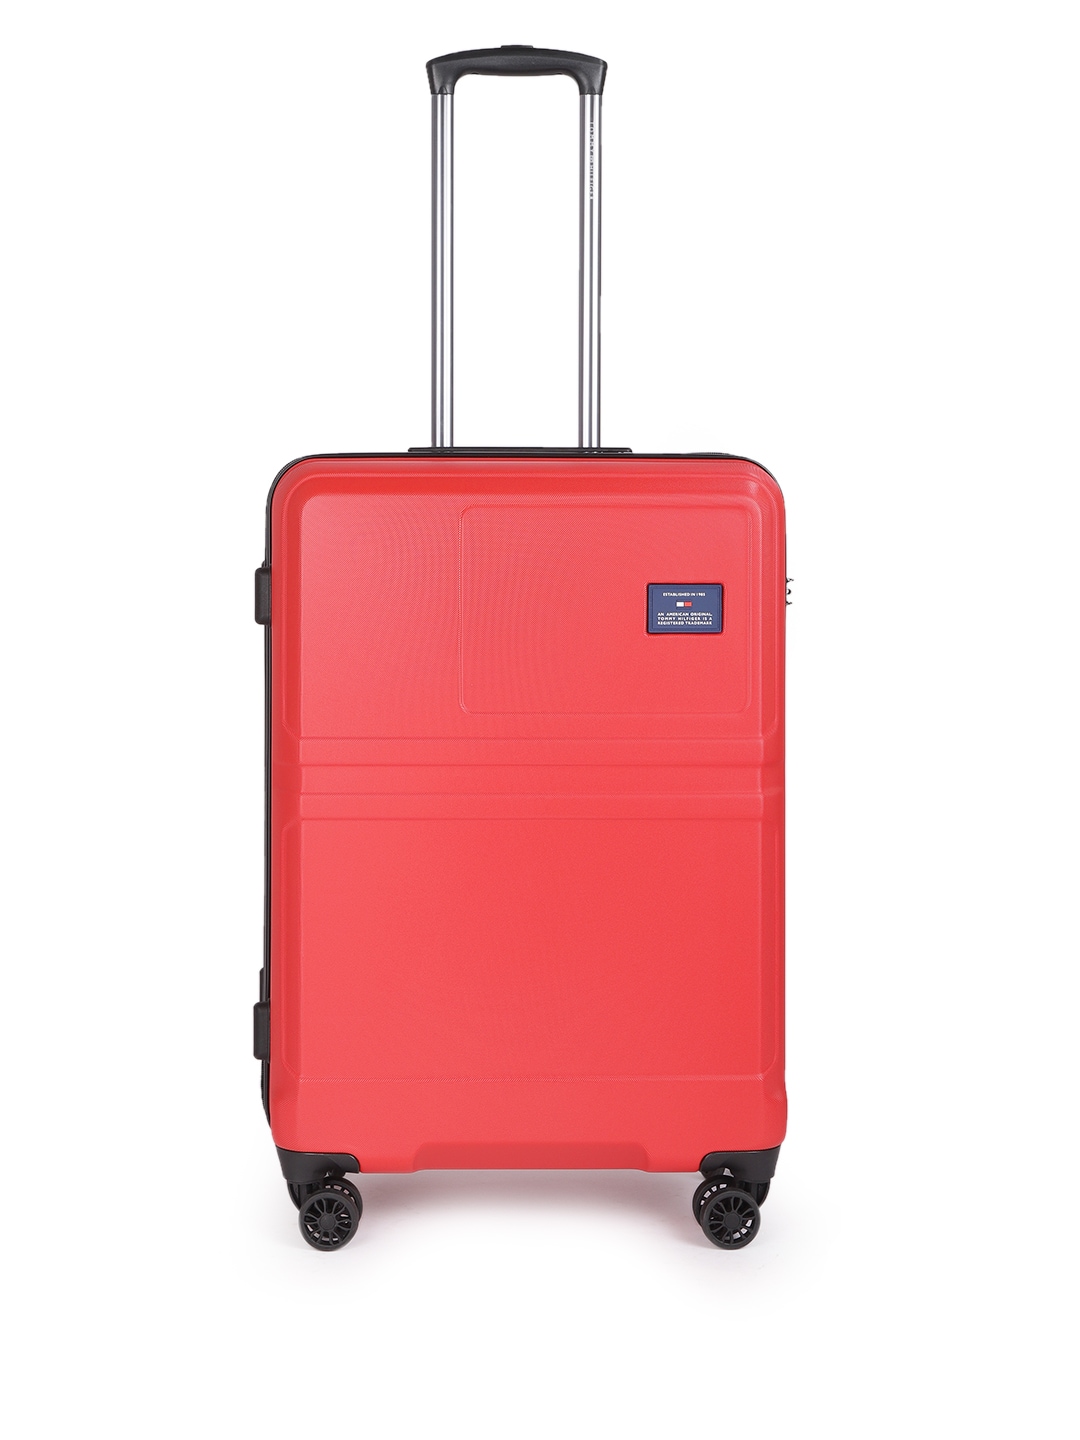 Tommy Hilfiger Unisex Red Solid Hard 4 Wheels 360-Degree Rotation Medium Trolley Bag Price in India